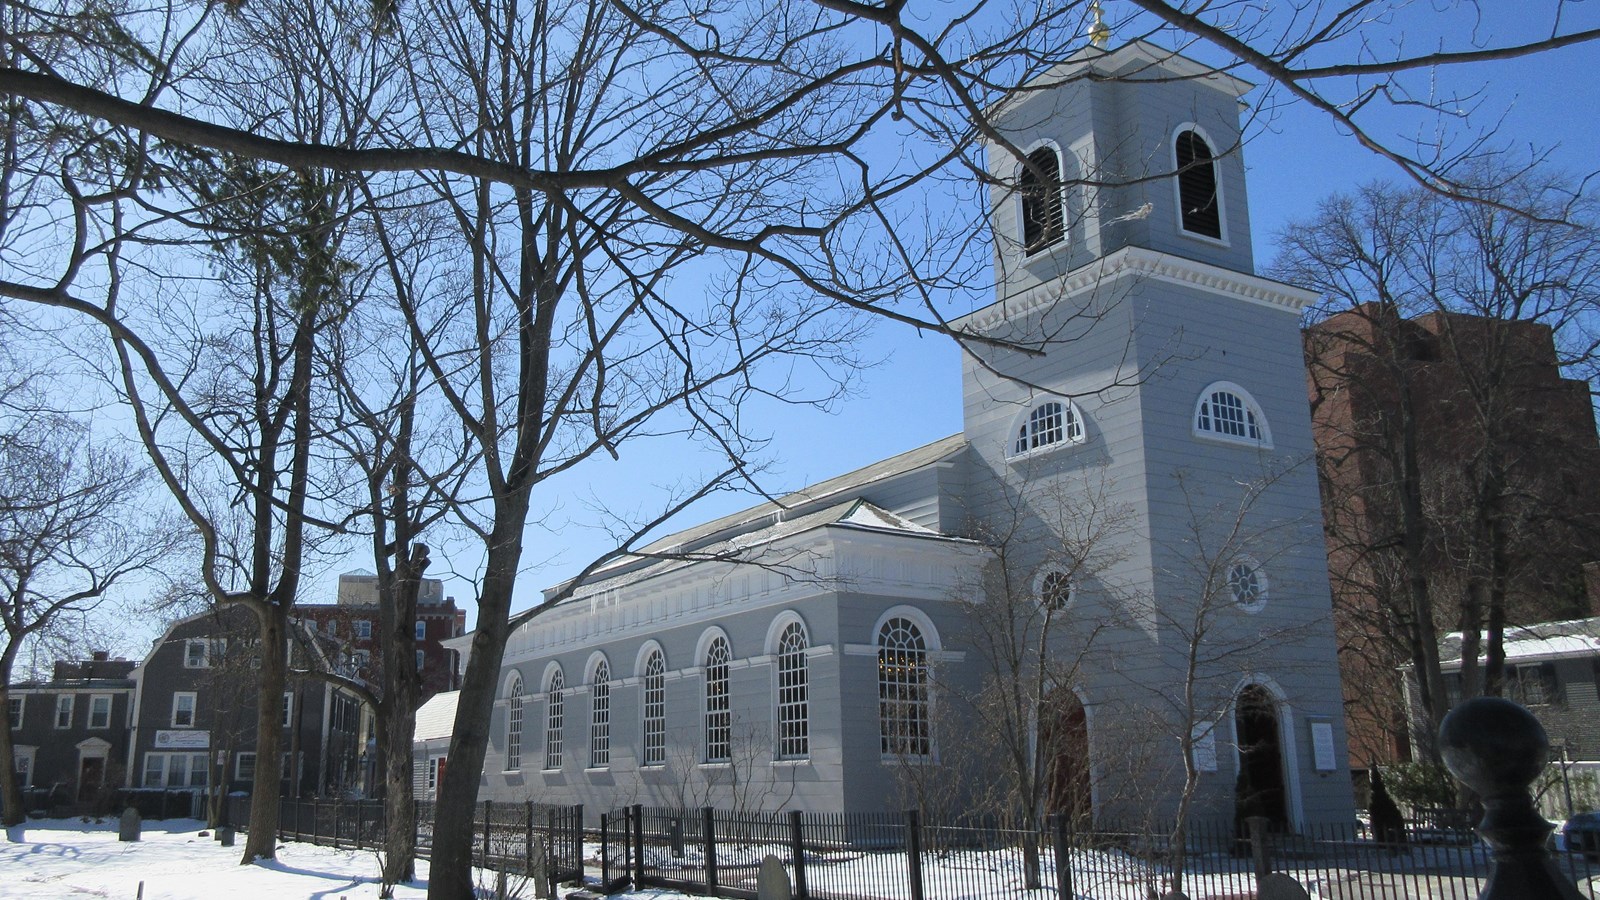 Gray wooden church building with short square steeple at front, and large arched windows along sides